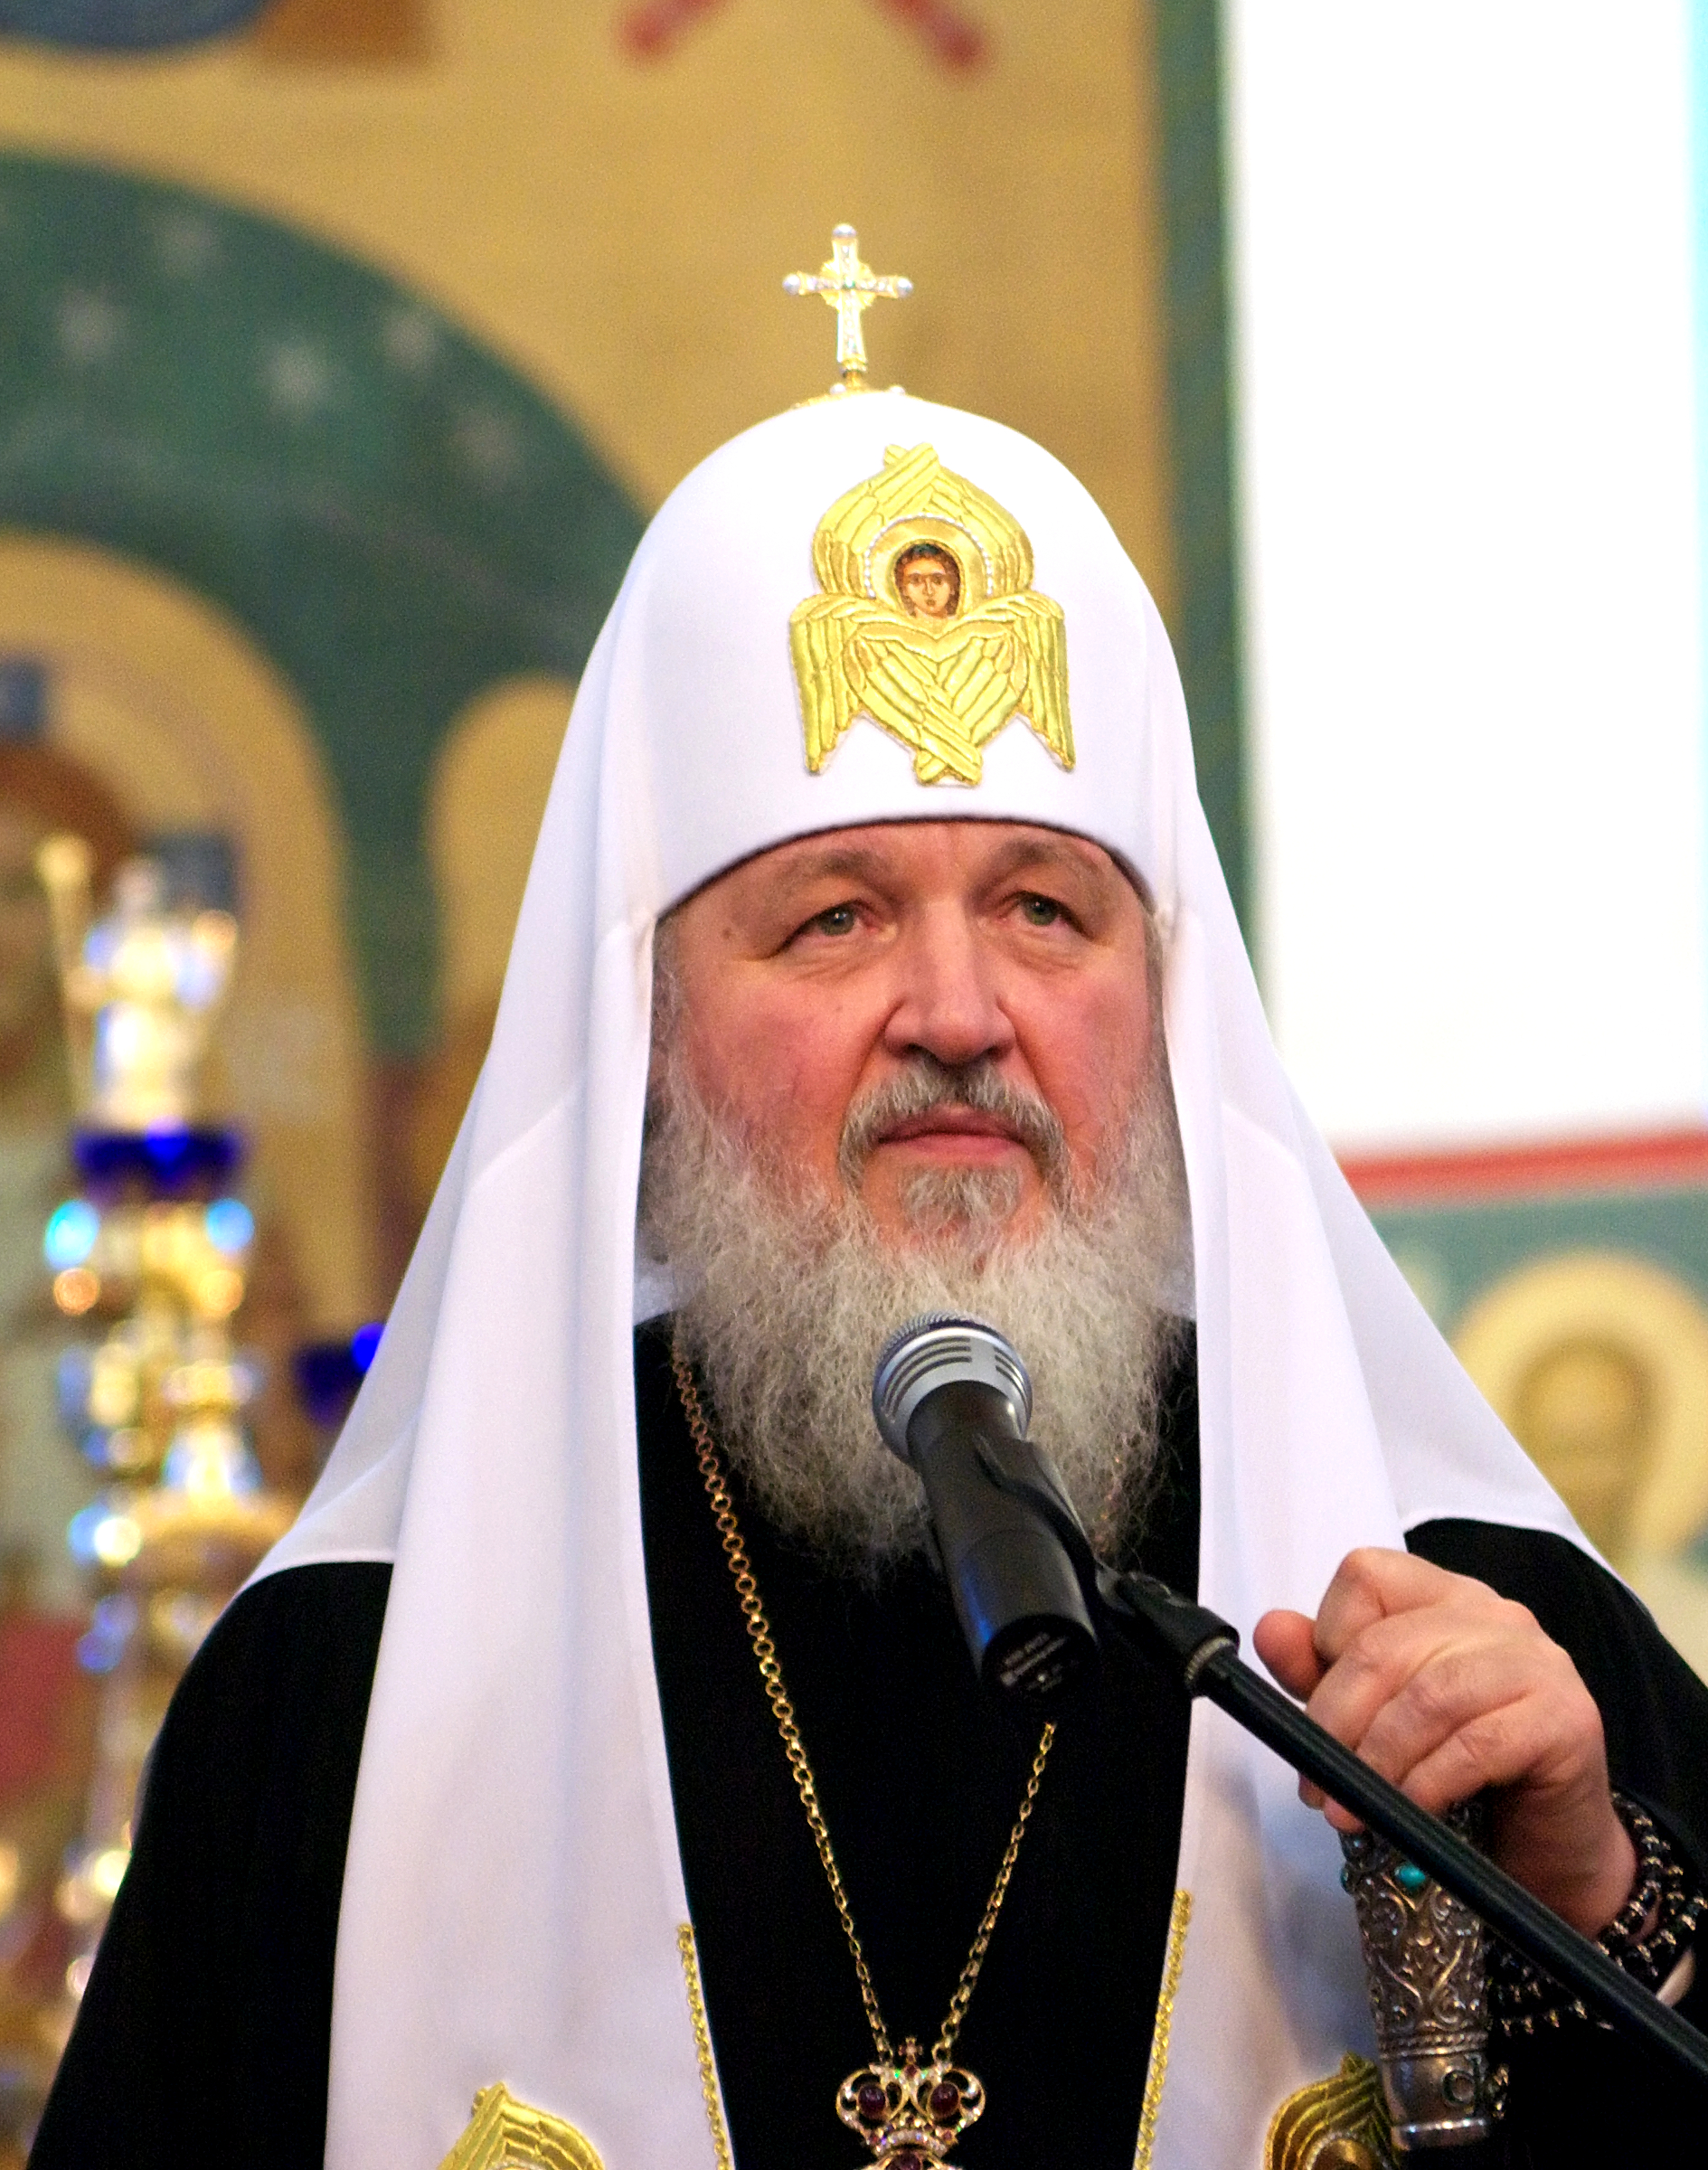 Patriarch_Kirill_I_of_Moscow_02_croppedjpg